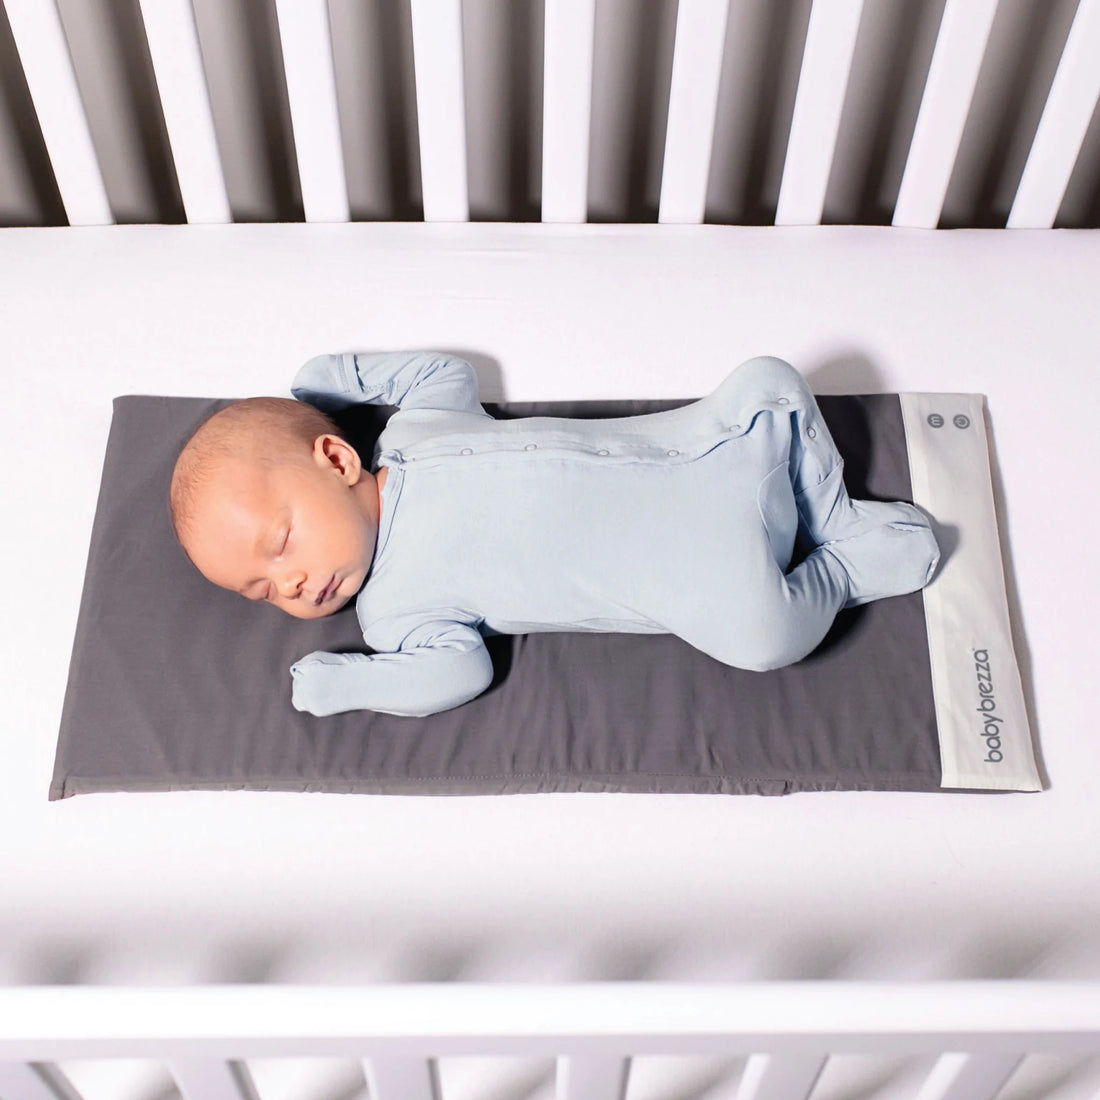 Ensuring safe sleep for your baby & products that can safely help!